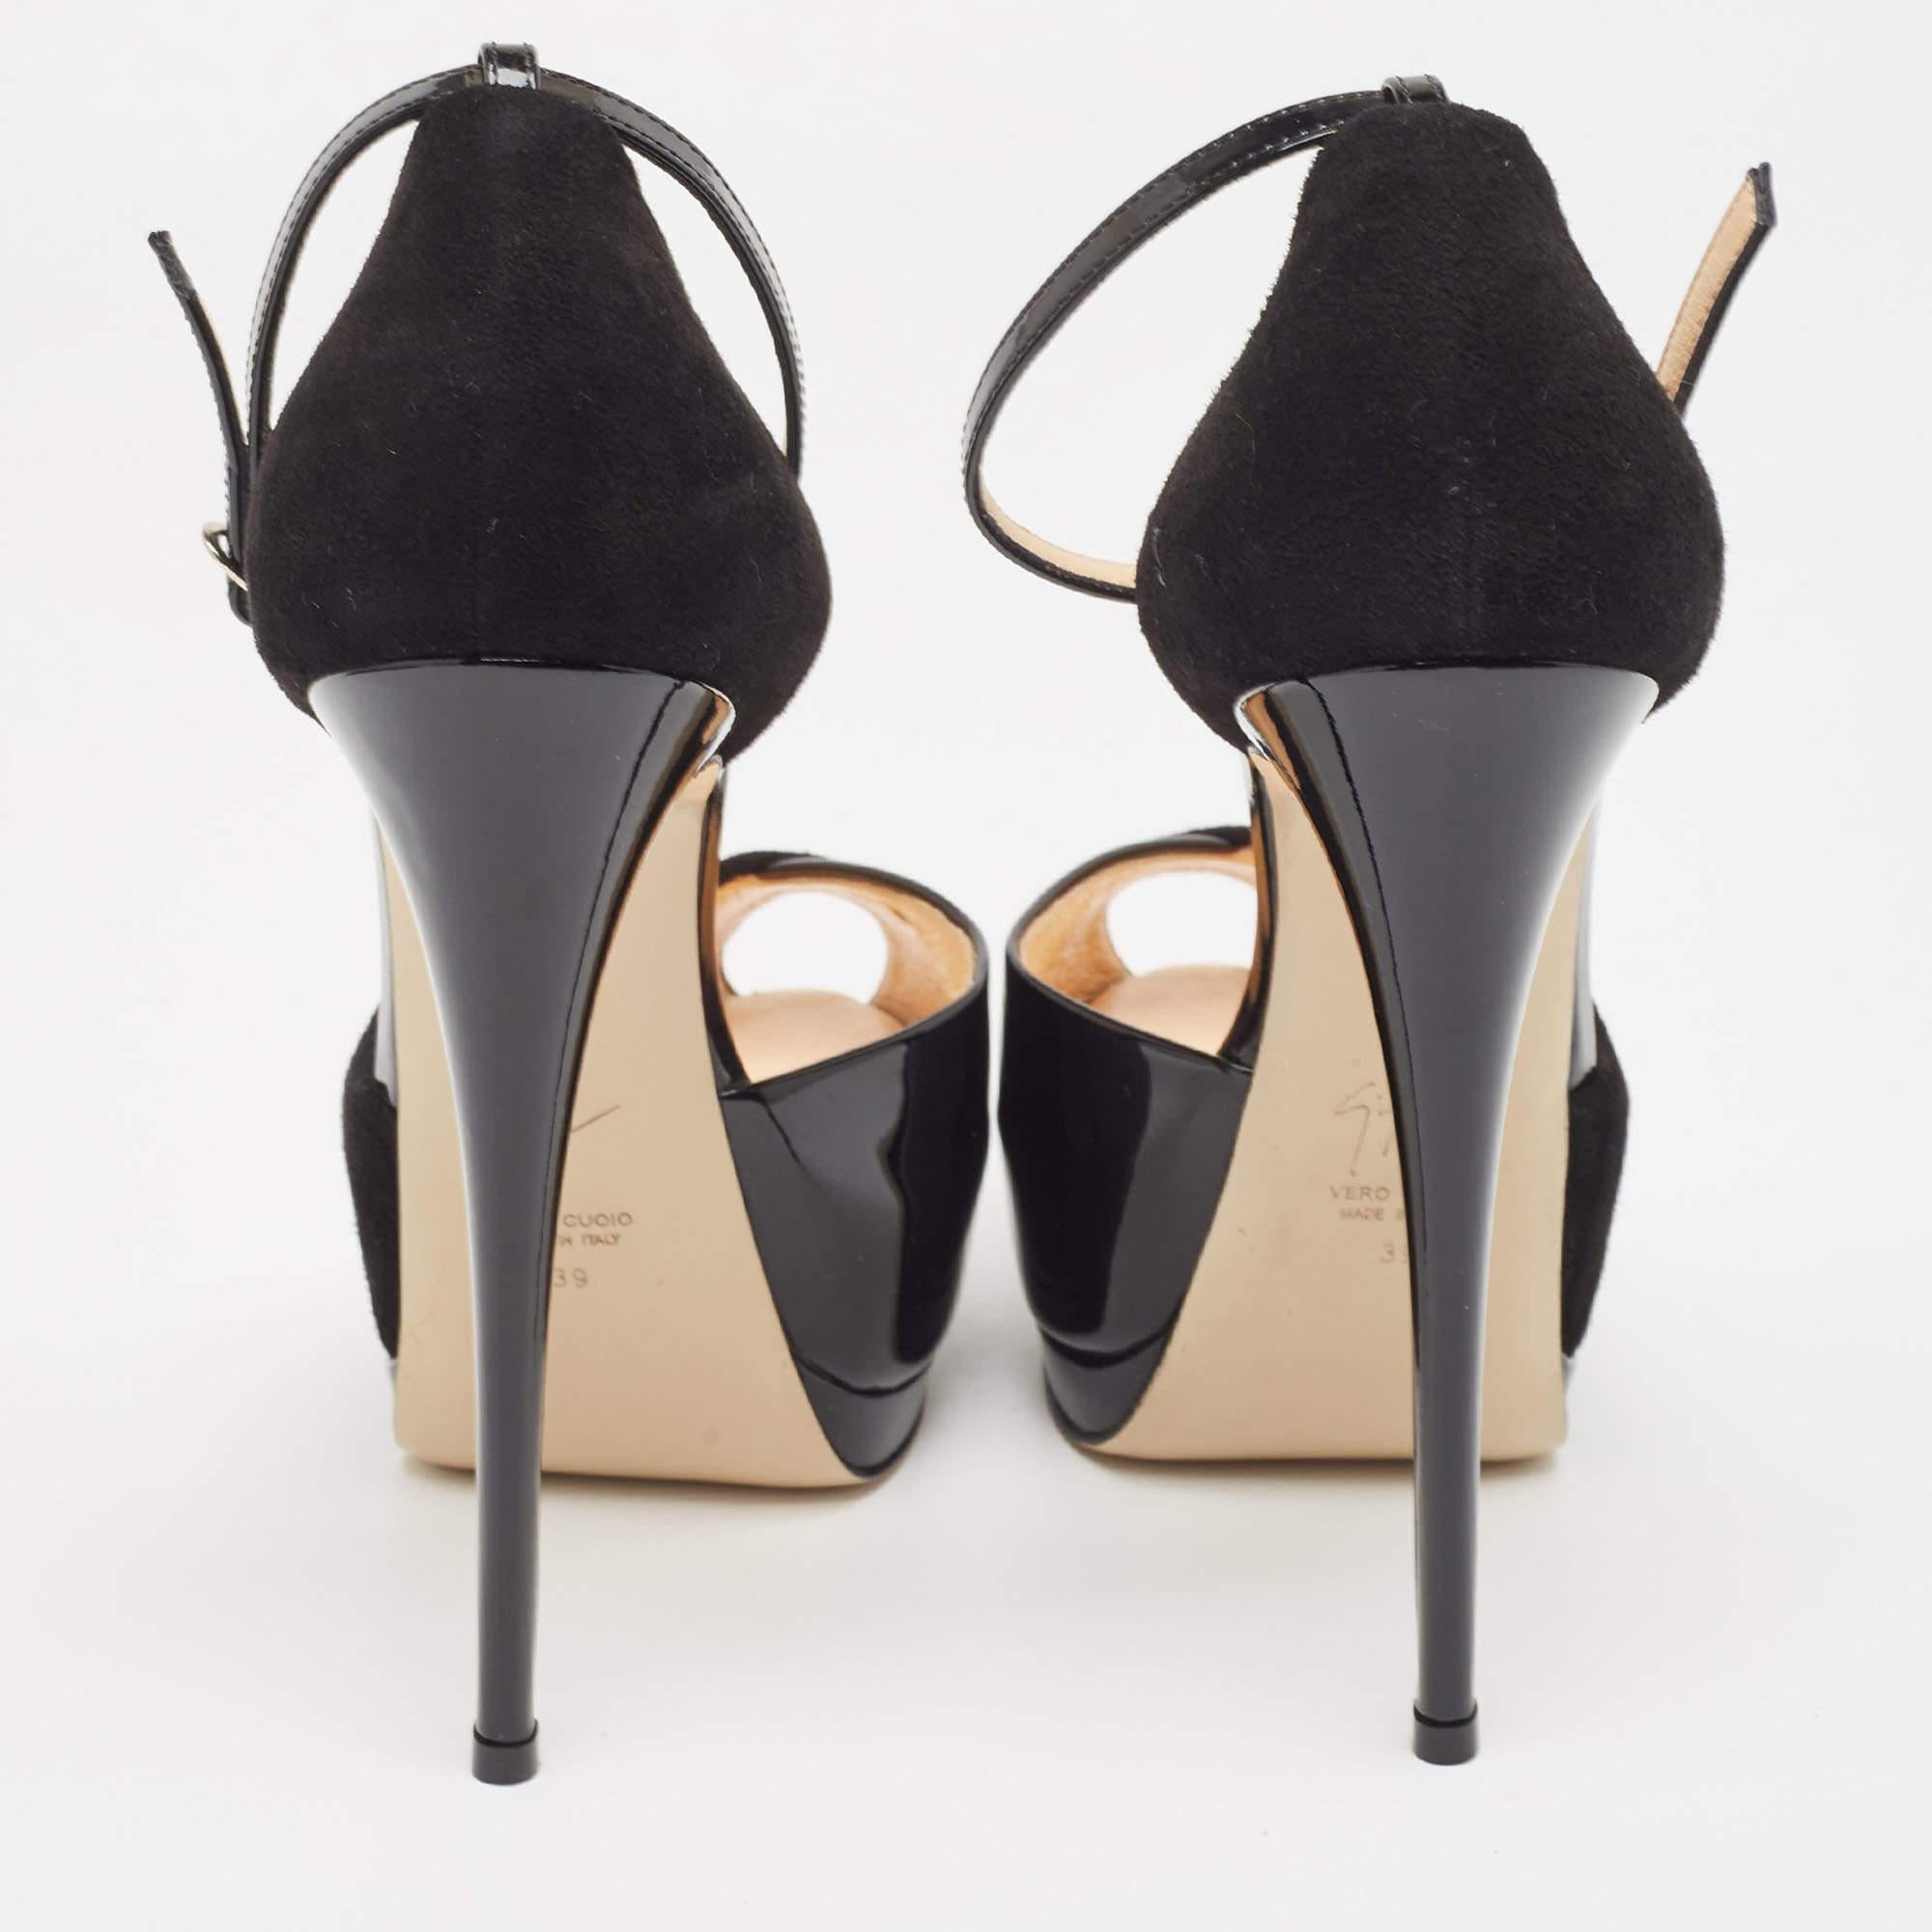 Giuseppe Zanotti Black Suede and Patent Peep Toe Ankle Strap Sandals Size 39 For Sale 1